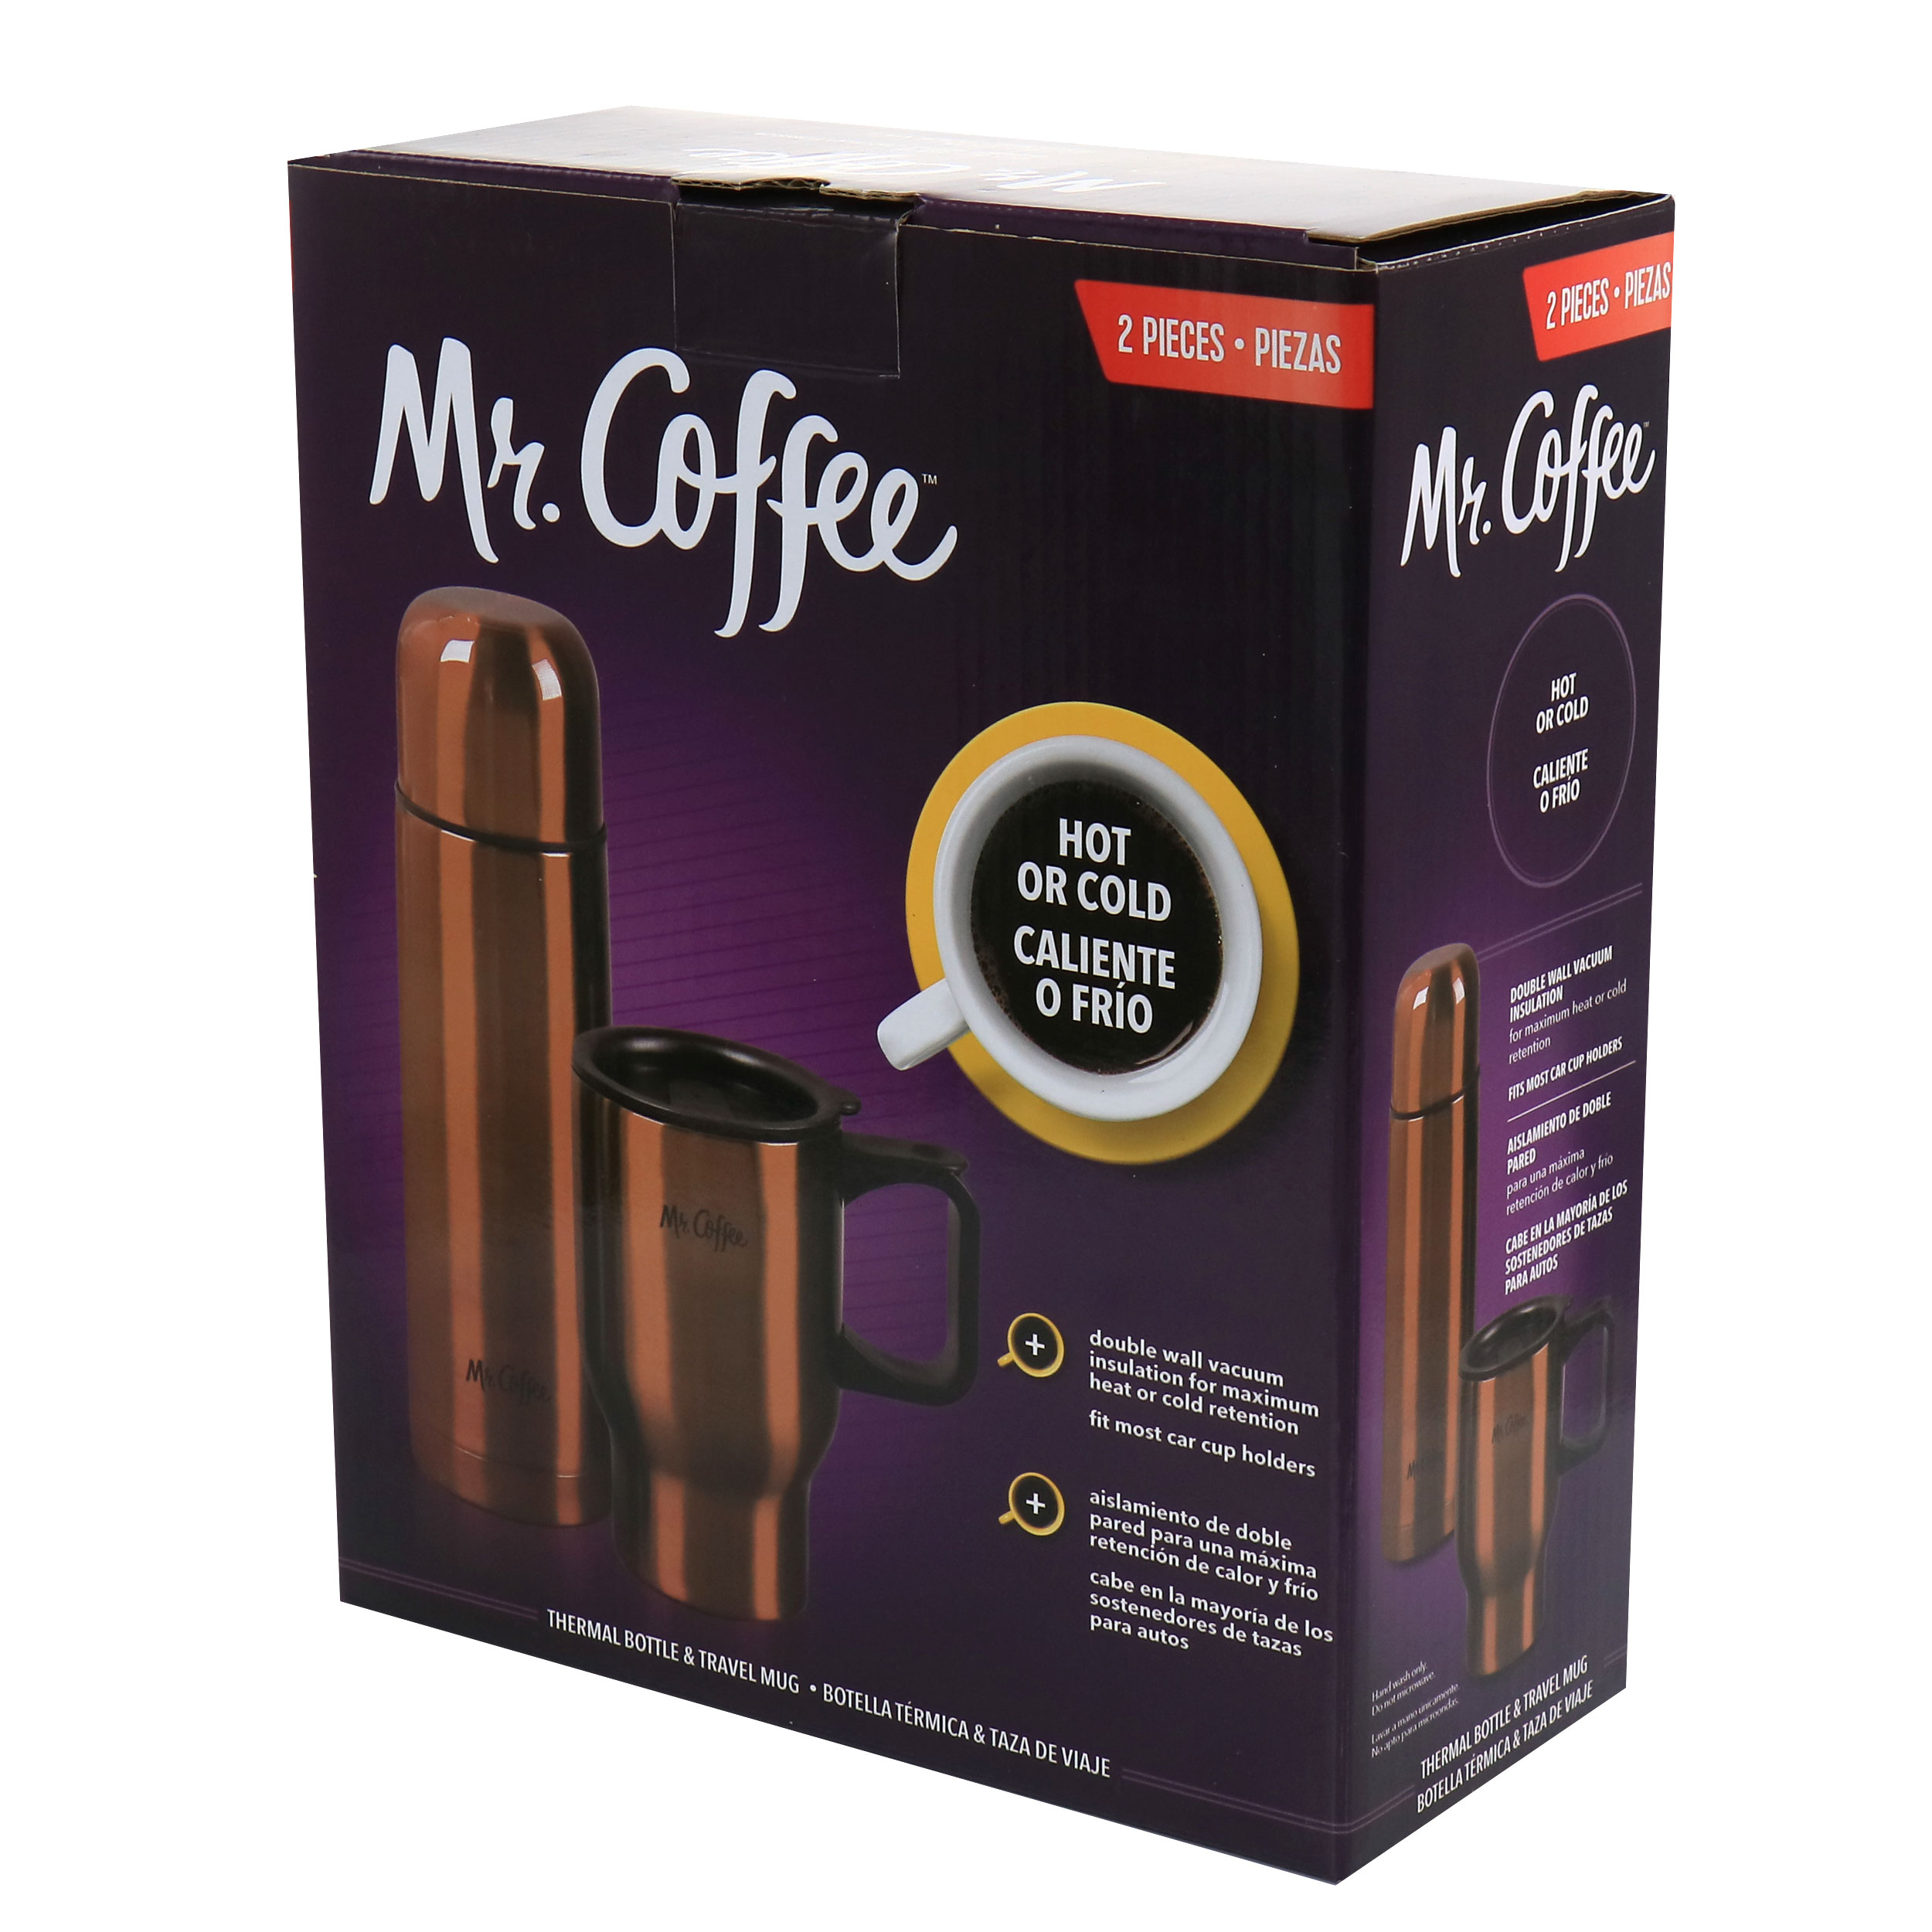 Mr. Coffee 15.5-fl oz Stainless Steel Insulated Travel Mug Set (2-Pack) in  the Water Bottles & Mugs department at